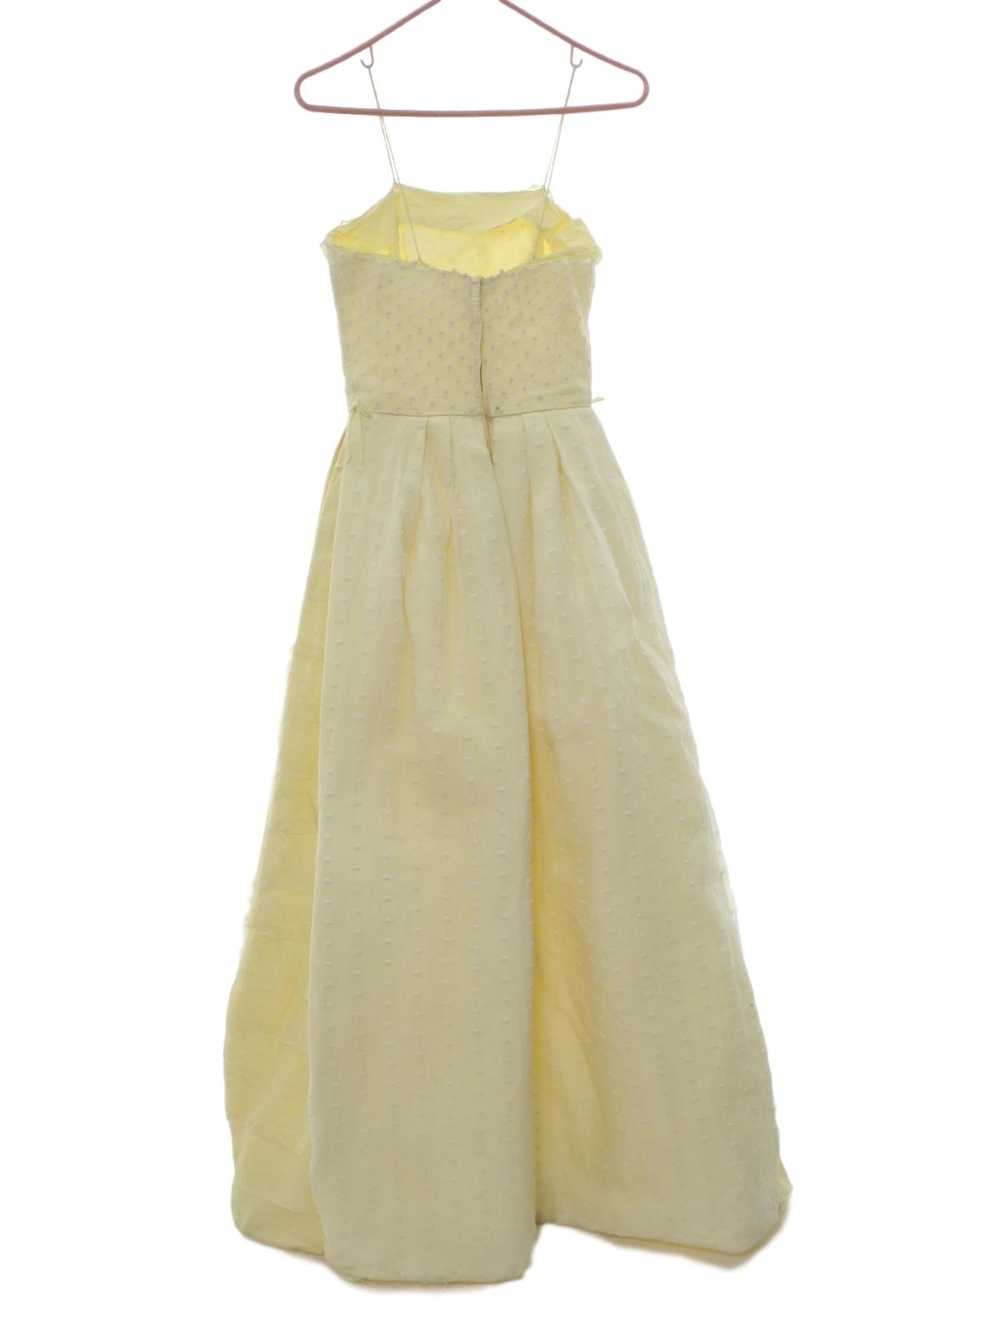 1960's Prom or Bridesmaid Dress - image 3